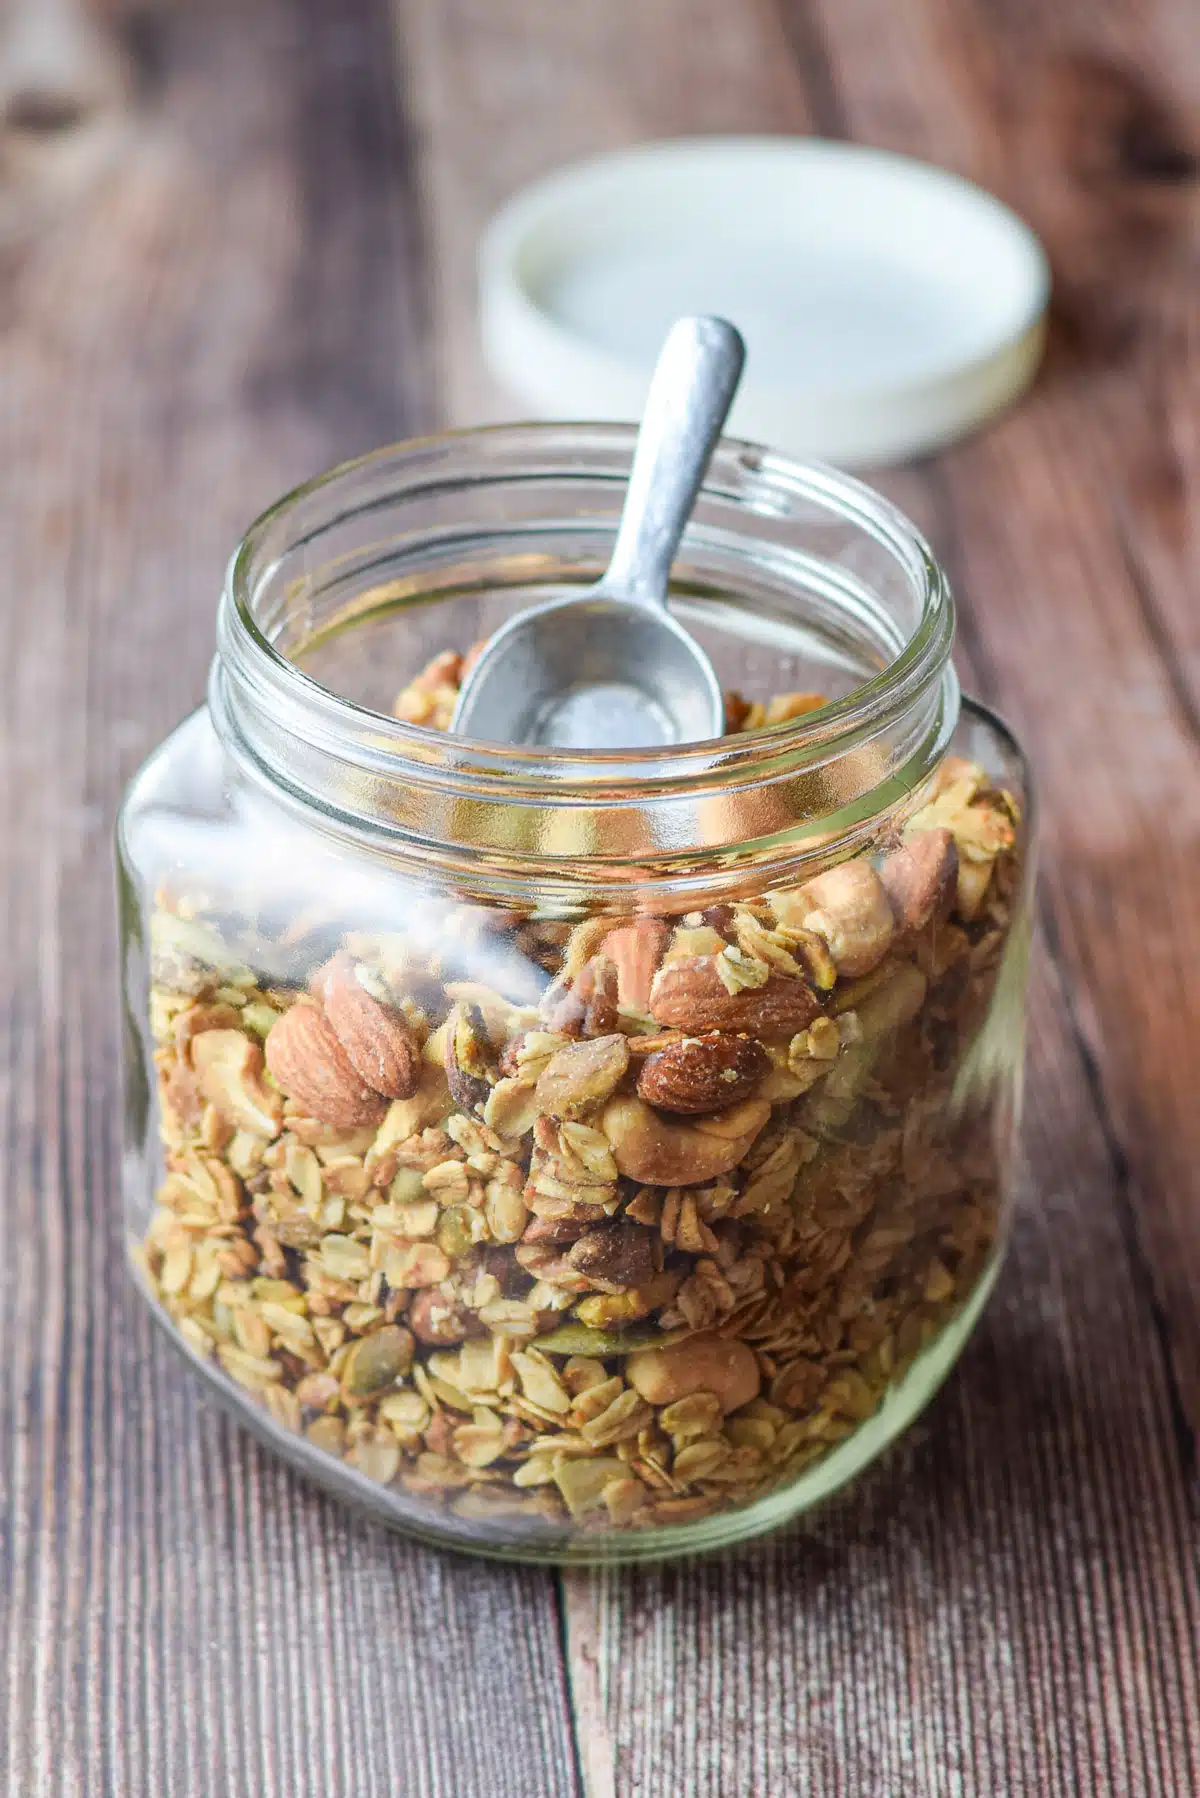 A large glass jar filled with nuts and granola with a small scoop in it